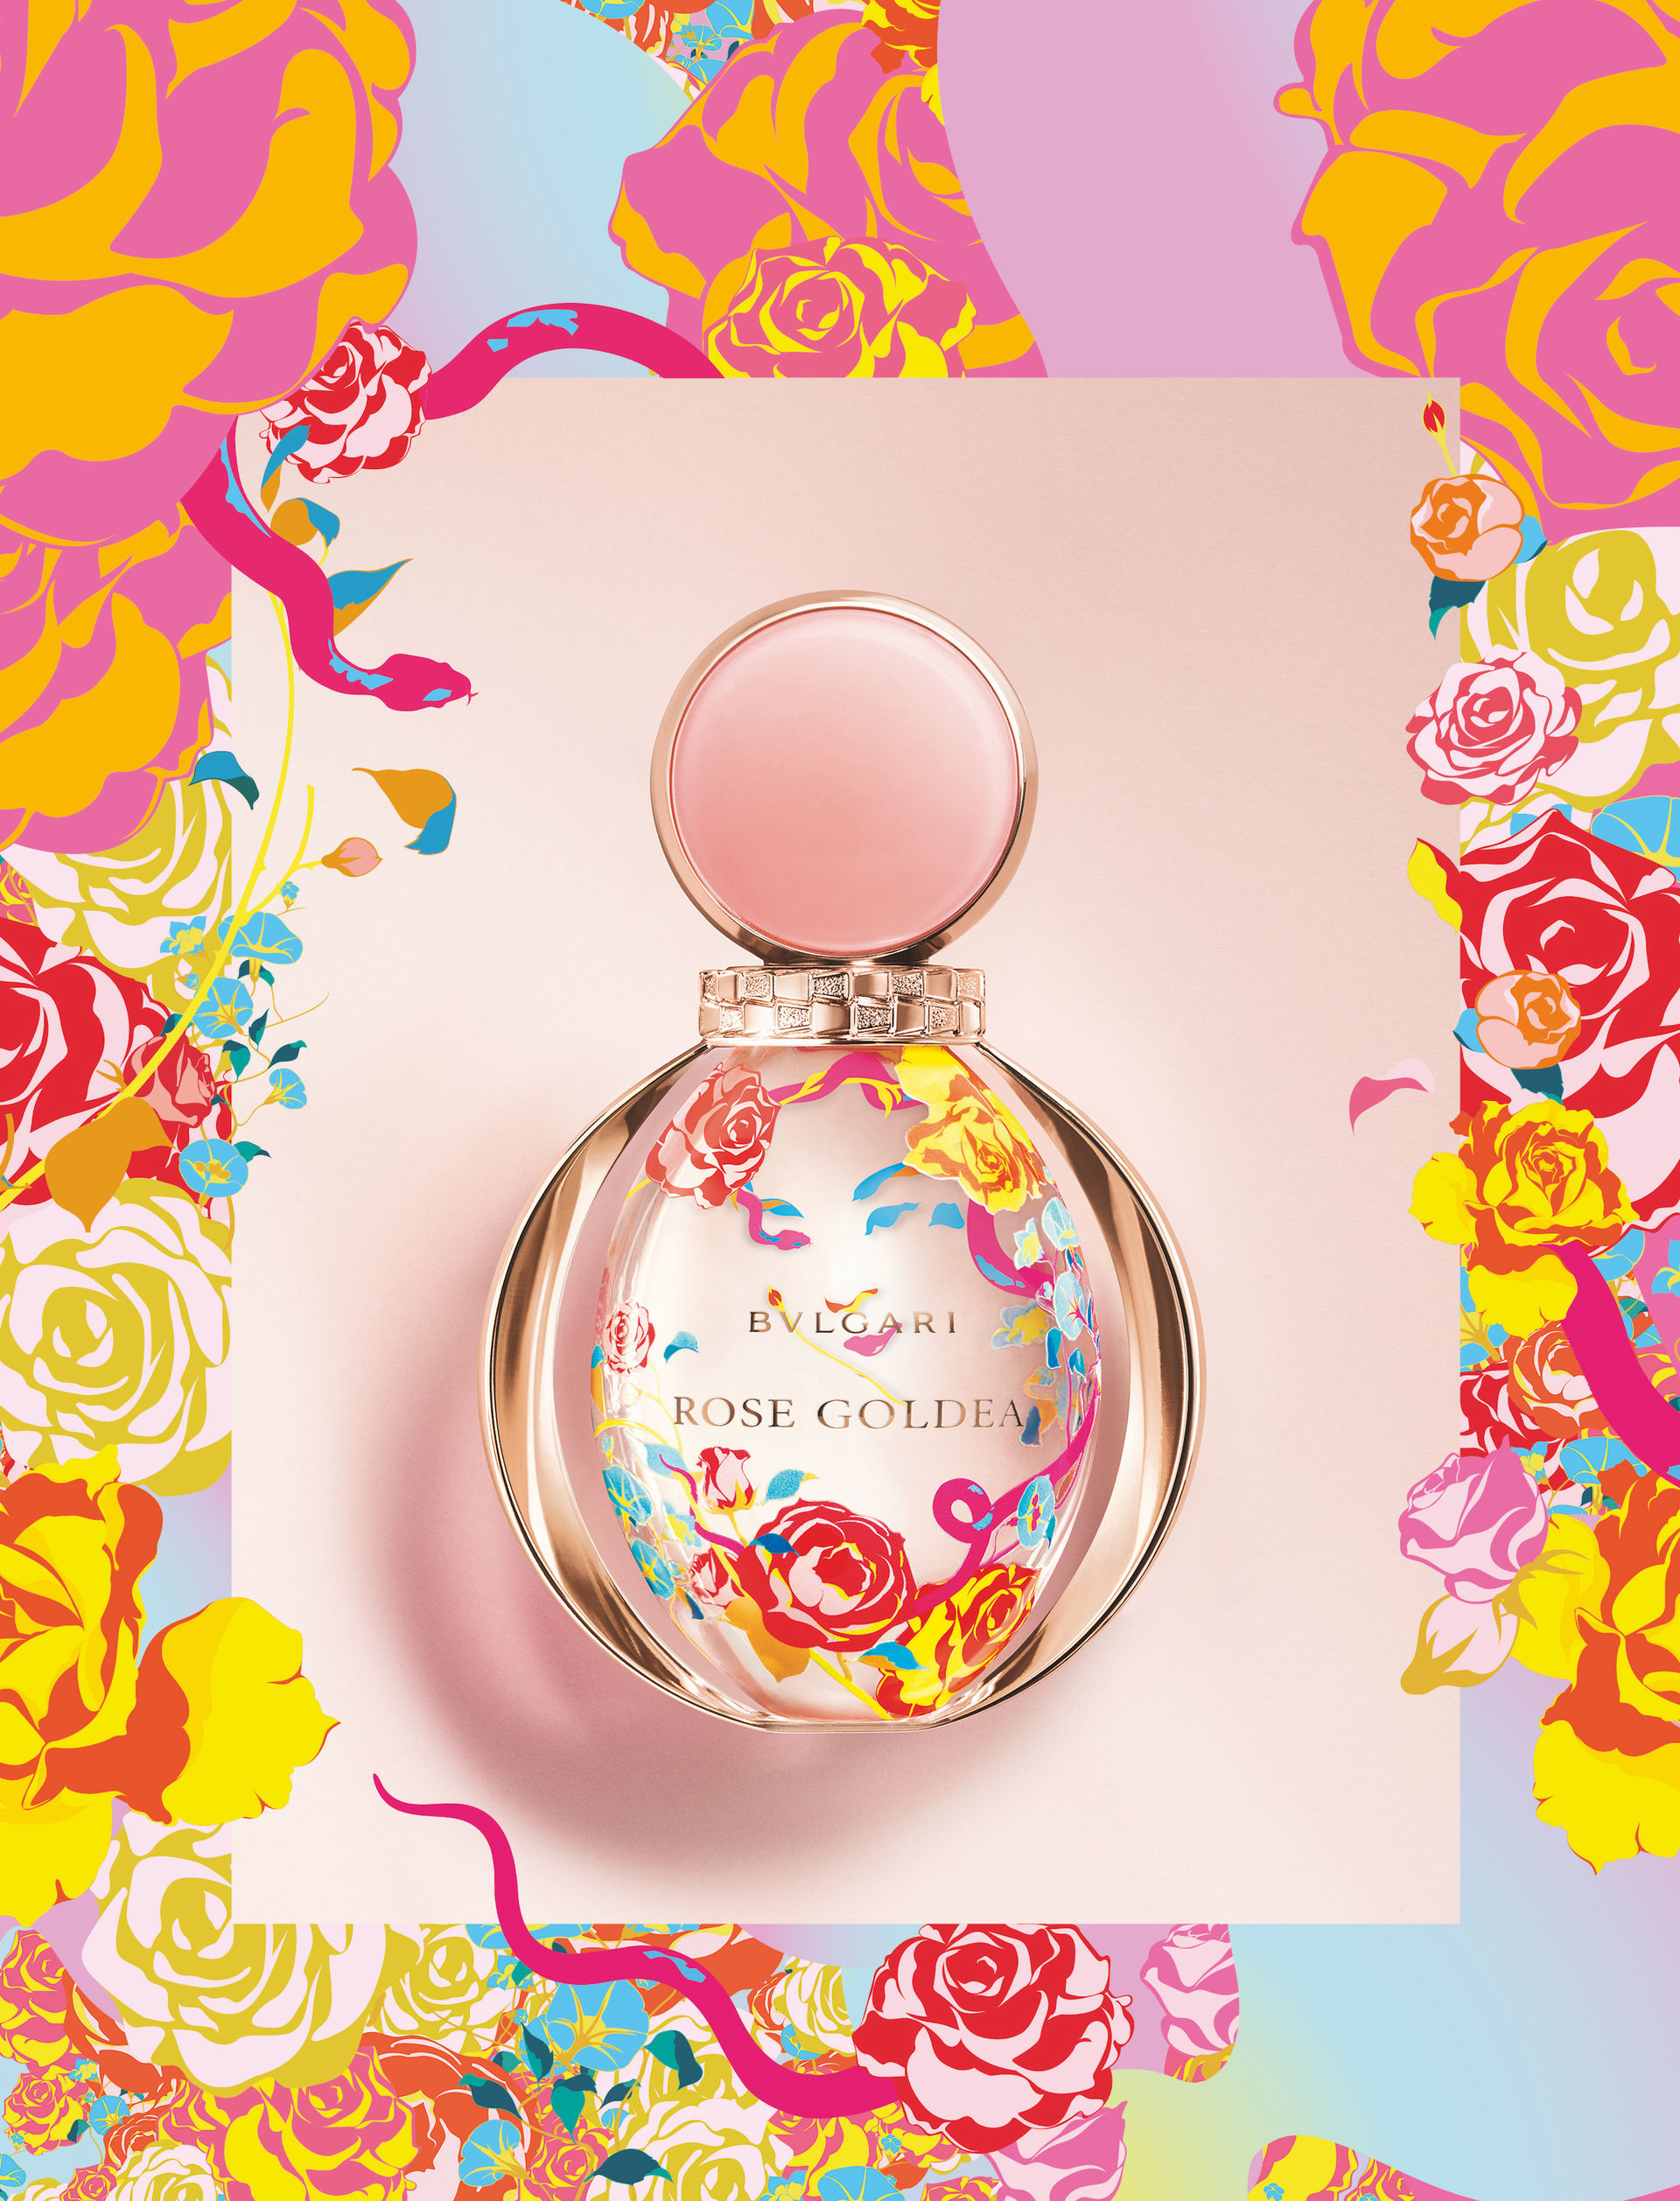 Gift a gift of Masterpiece with Bvlgari’s Rose Goldea Limited Edition